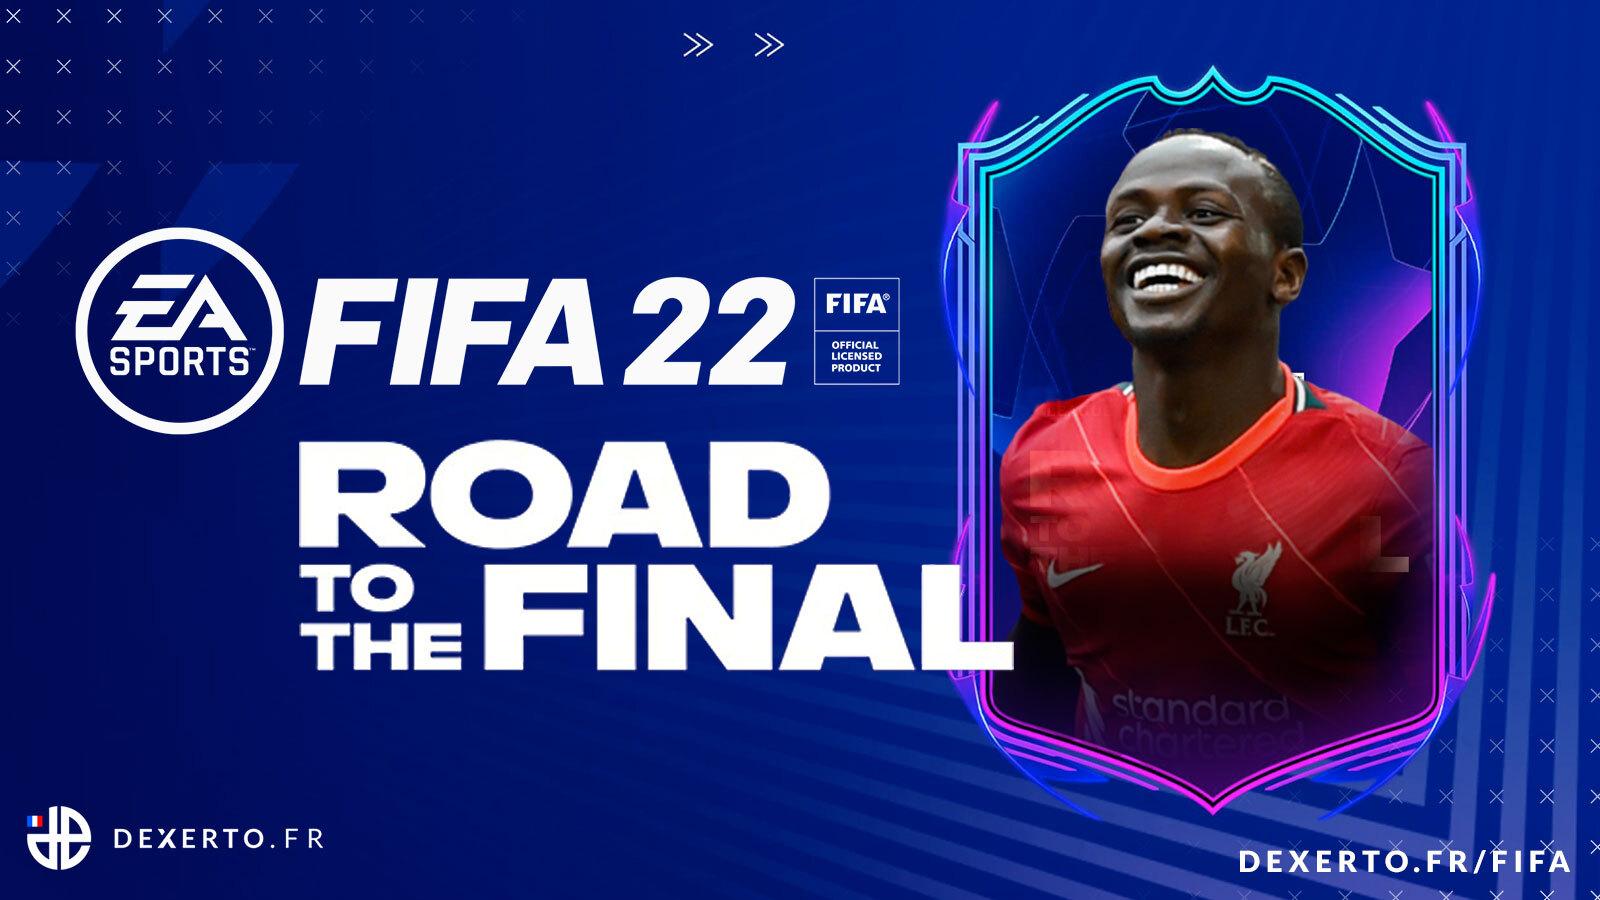 FIFA 22 road to the final tracker